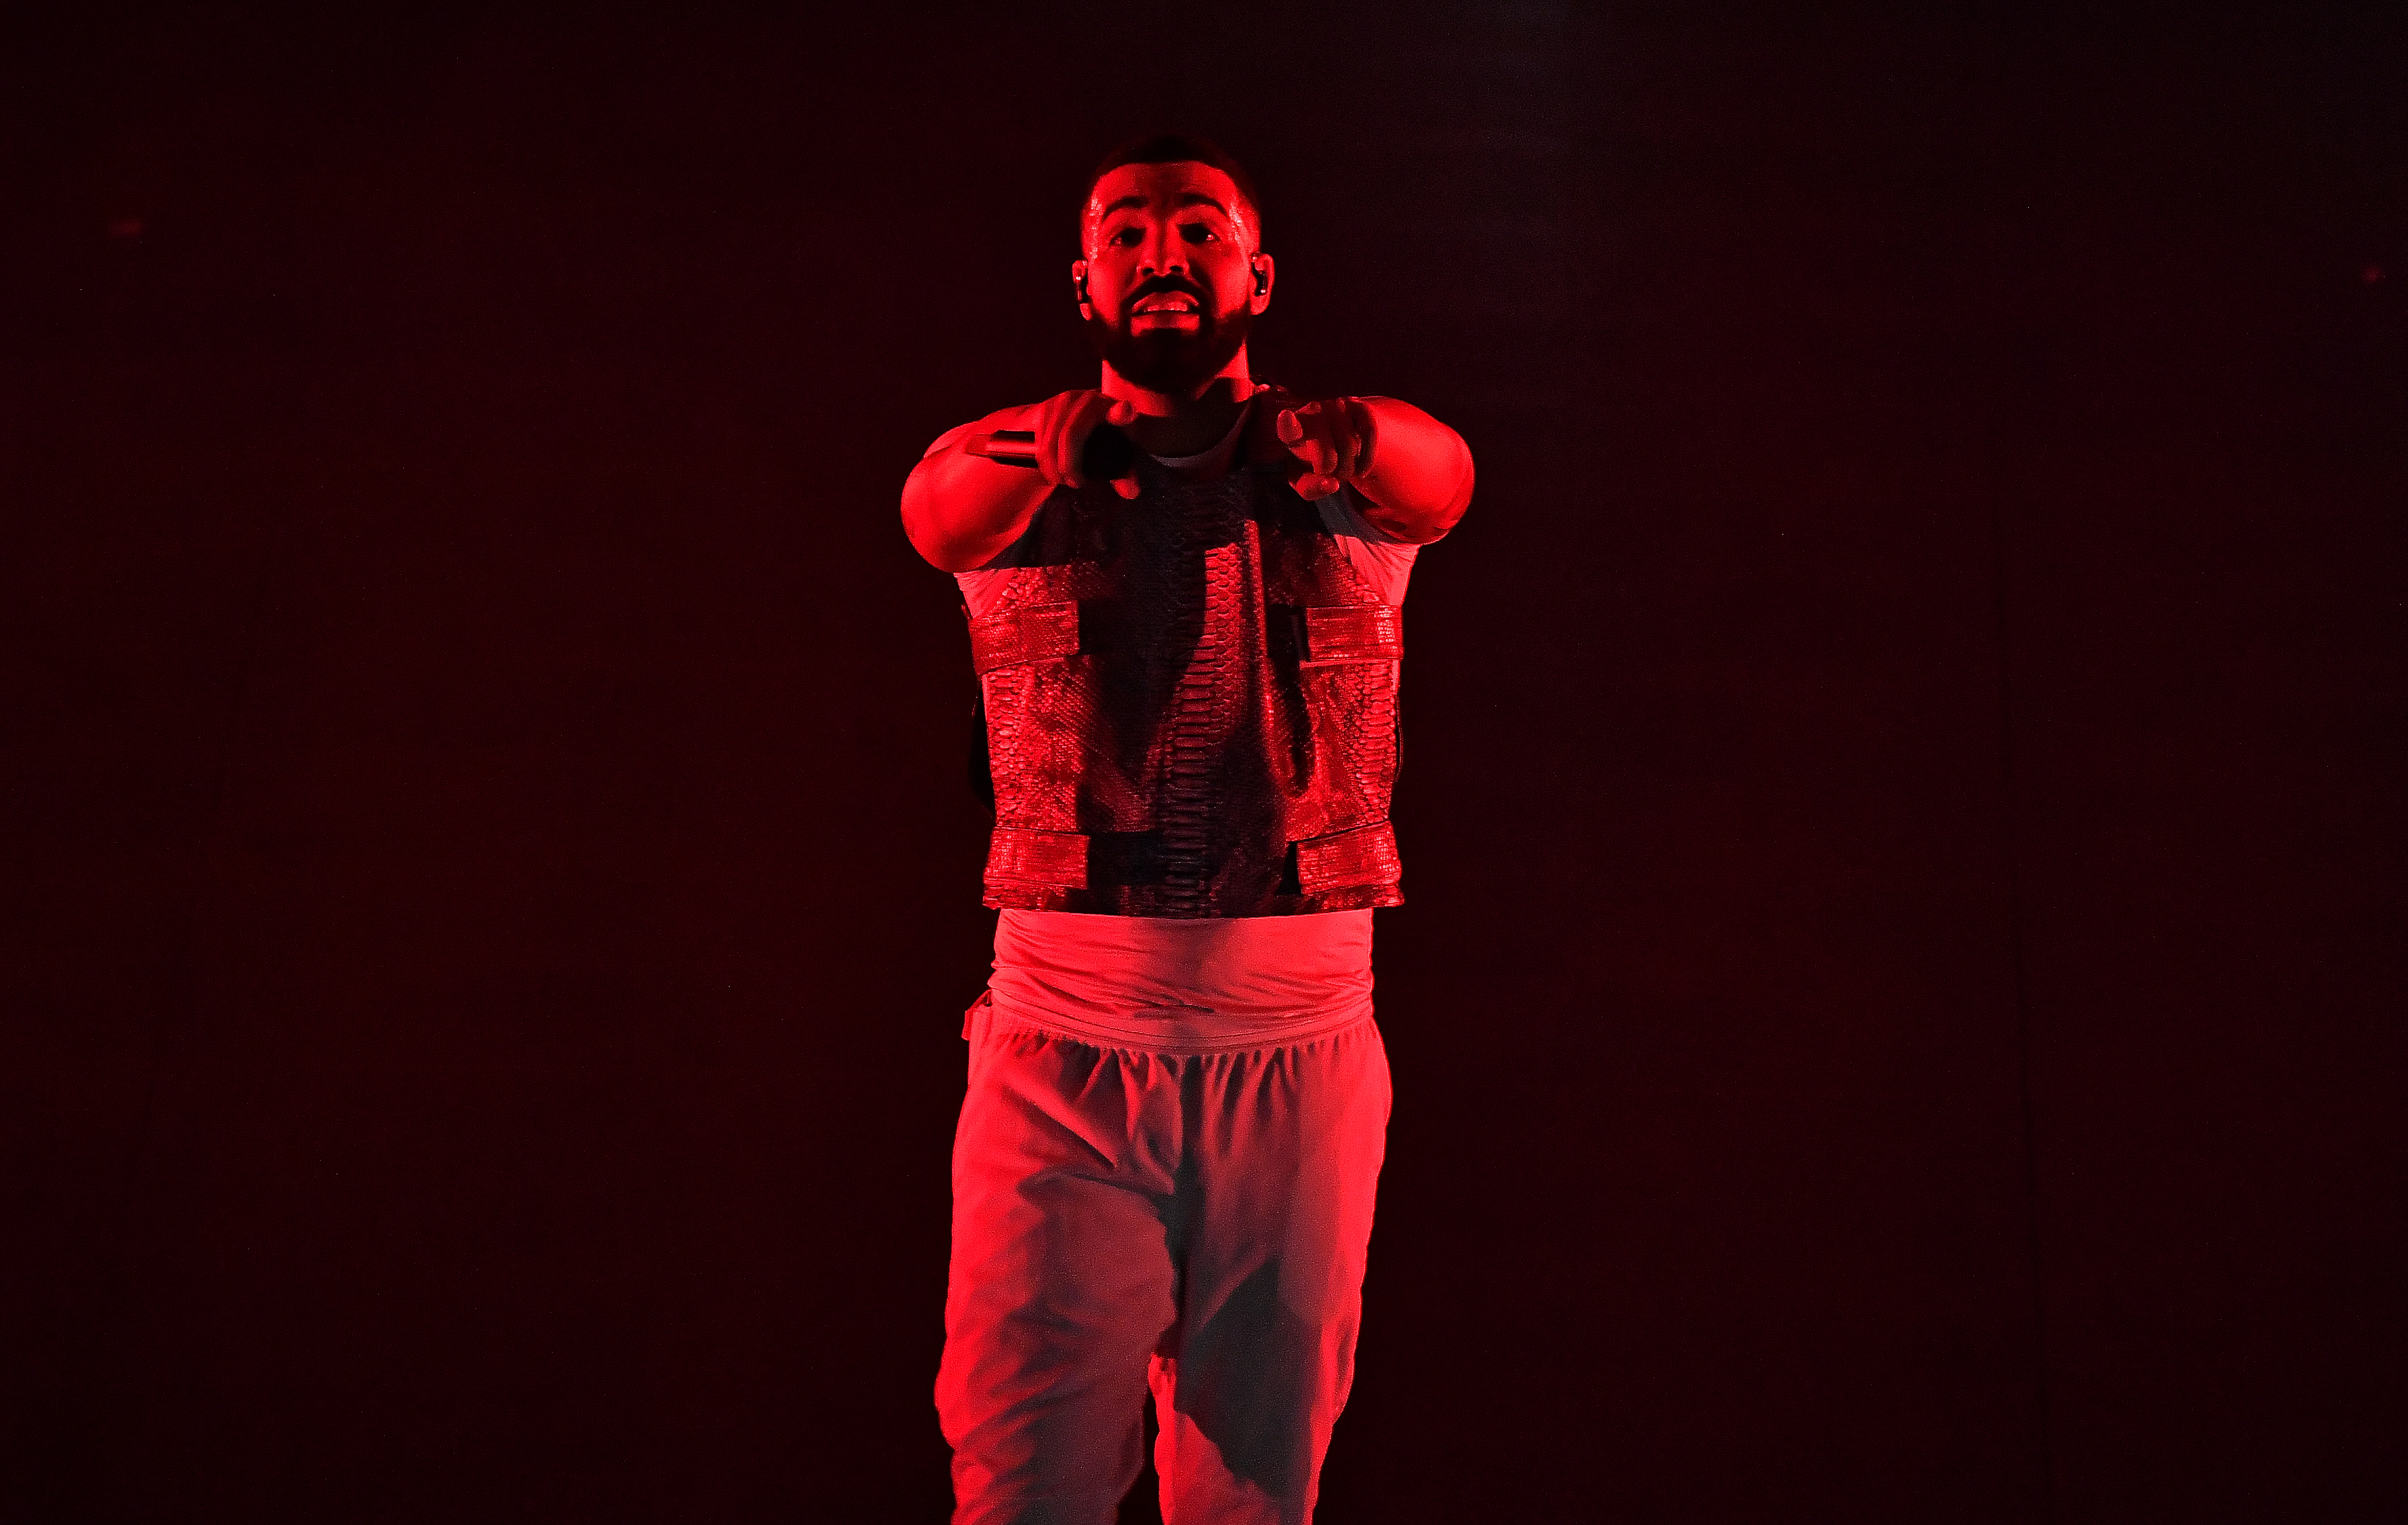 The Most Influential Artists: #32 Drake